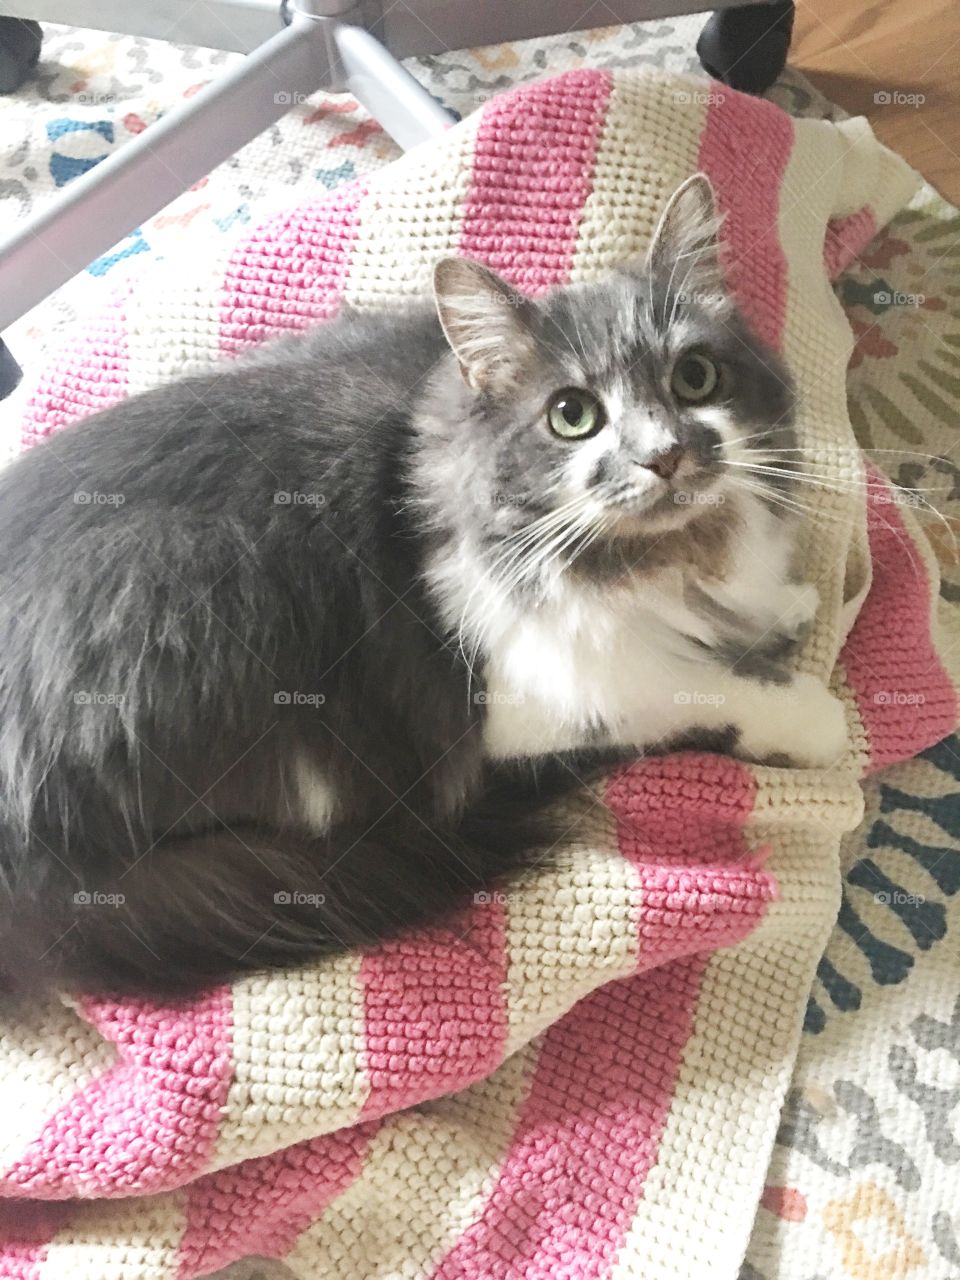 Kitty on a blanket